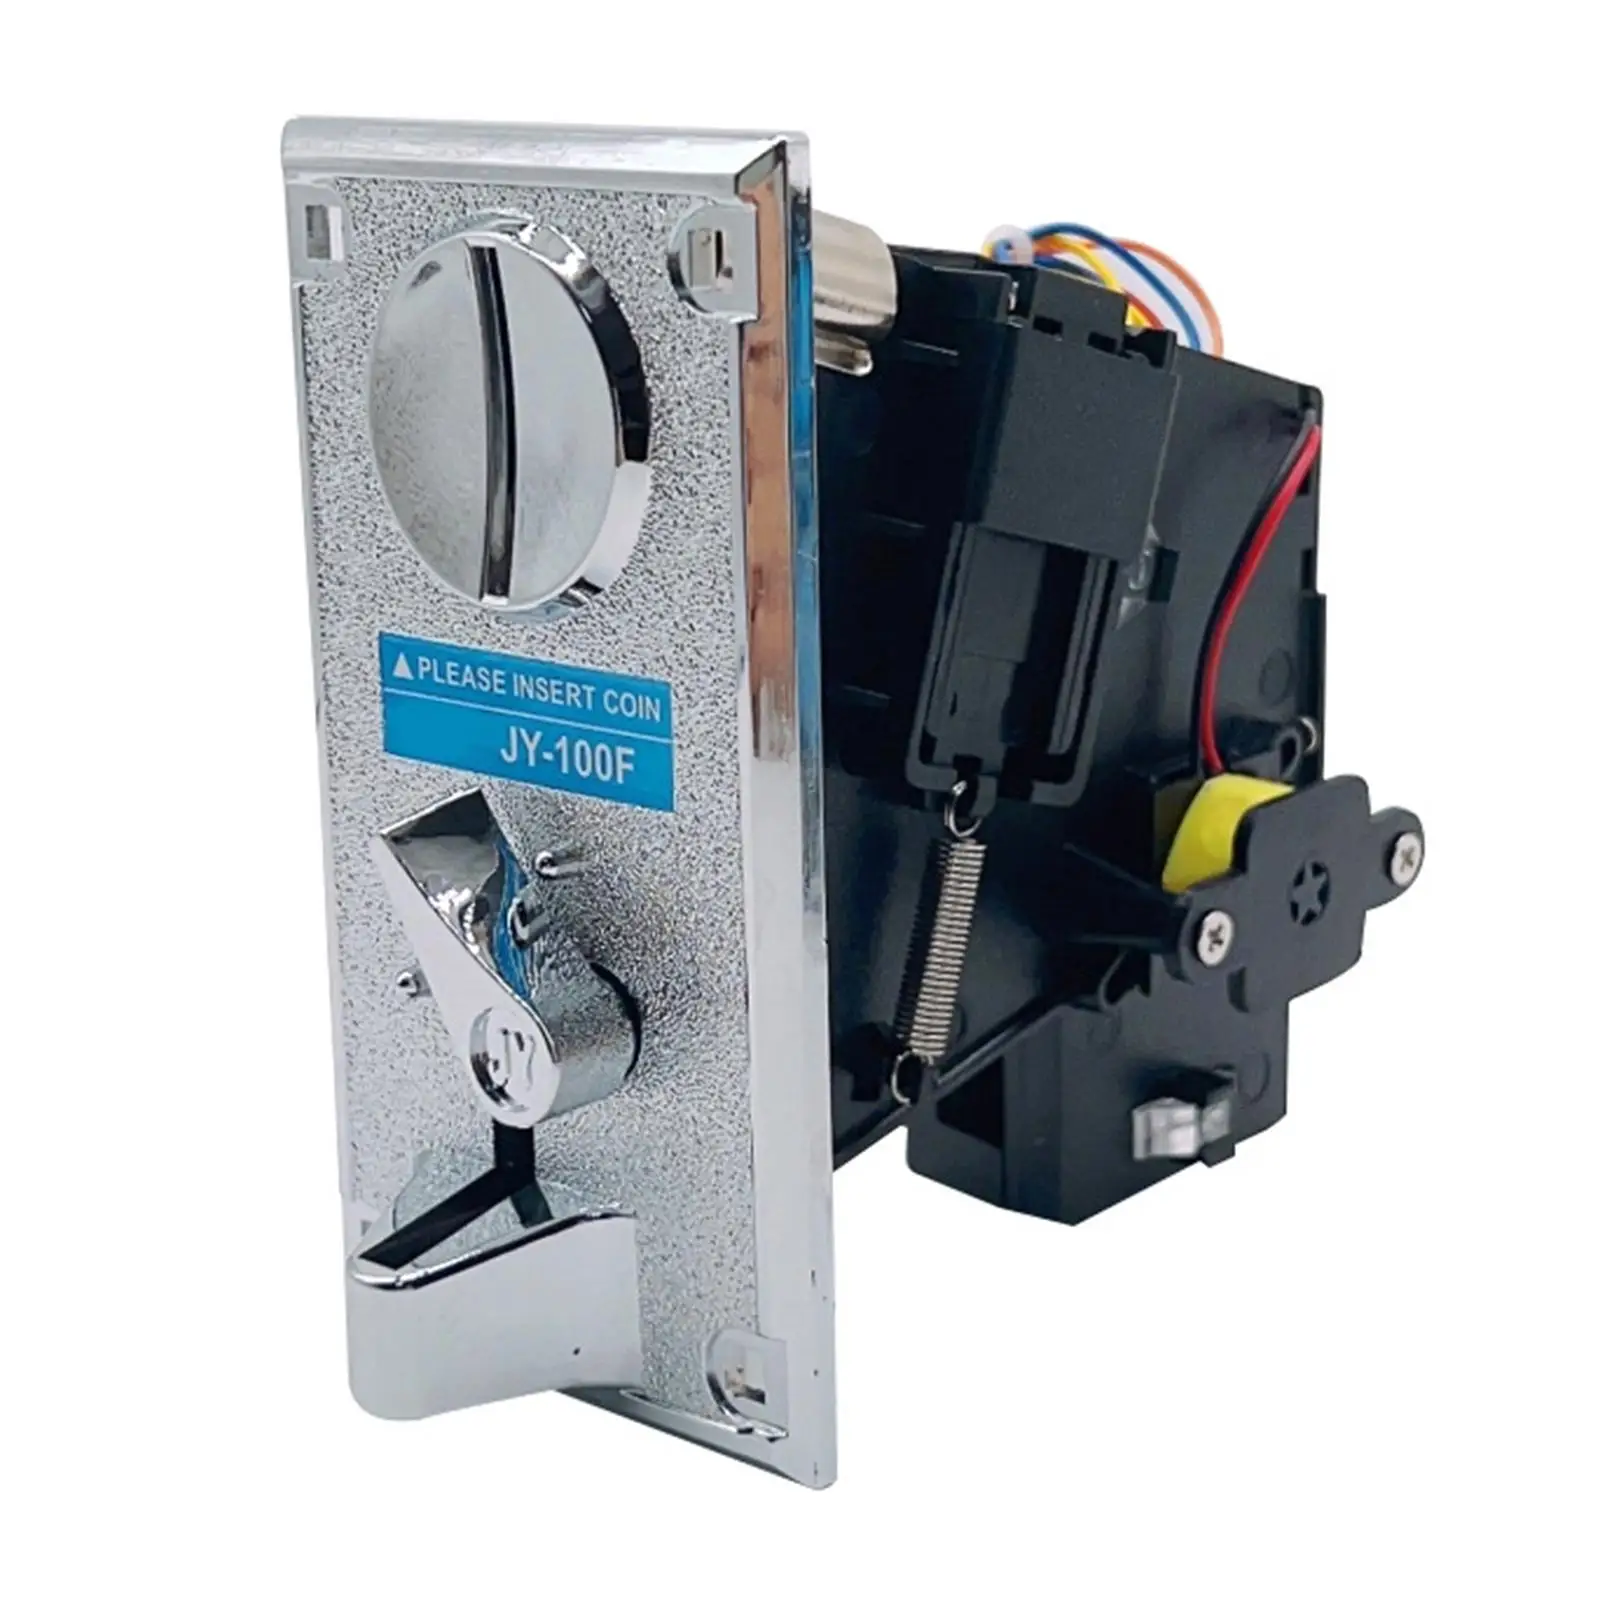 Coin Acceptor Selector Jy-100F Comparative for Street Basketball Attachments